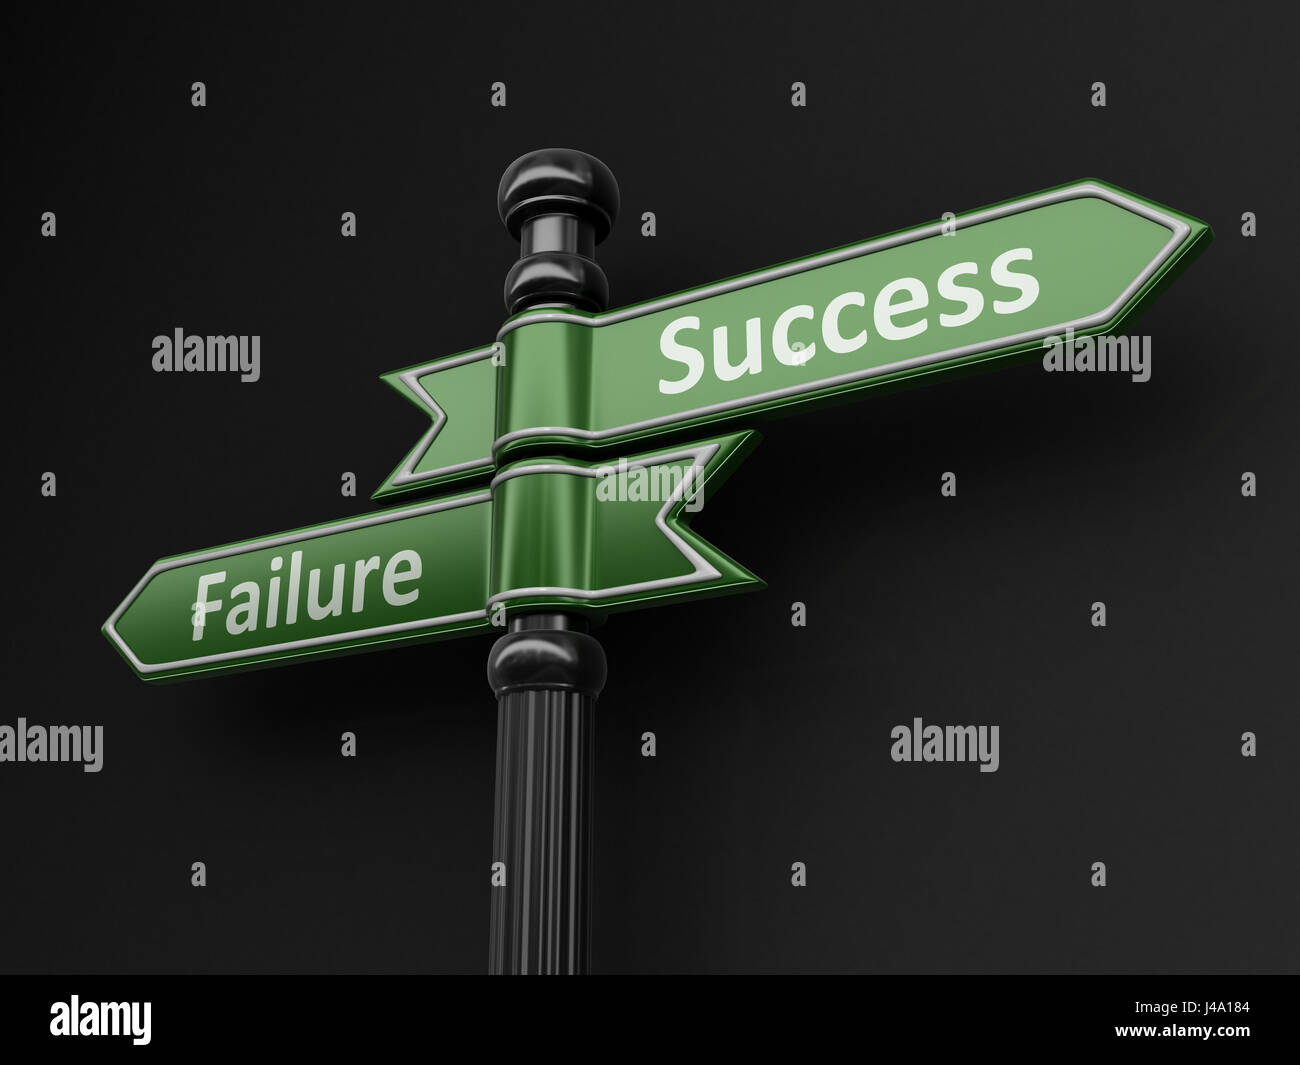 Failure and Success pointers on signpost. Image with clipping path Stock Photo